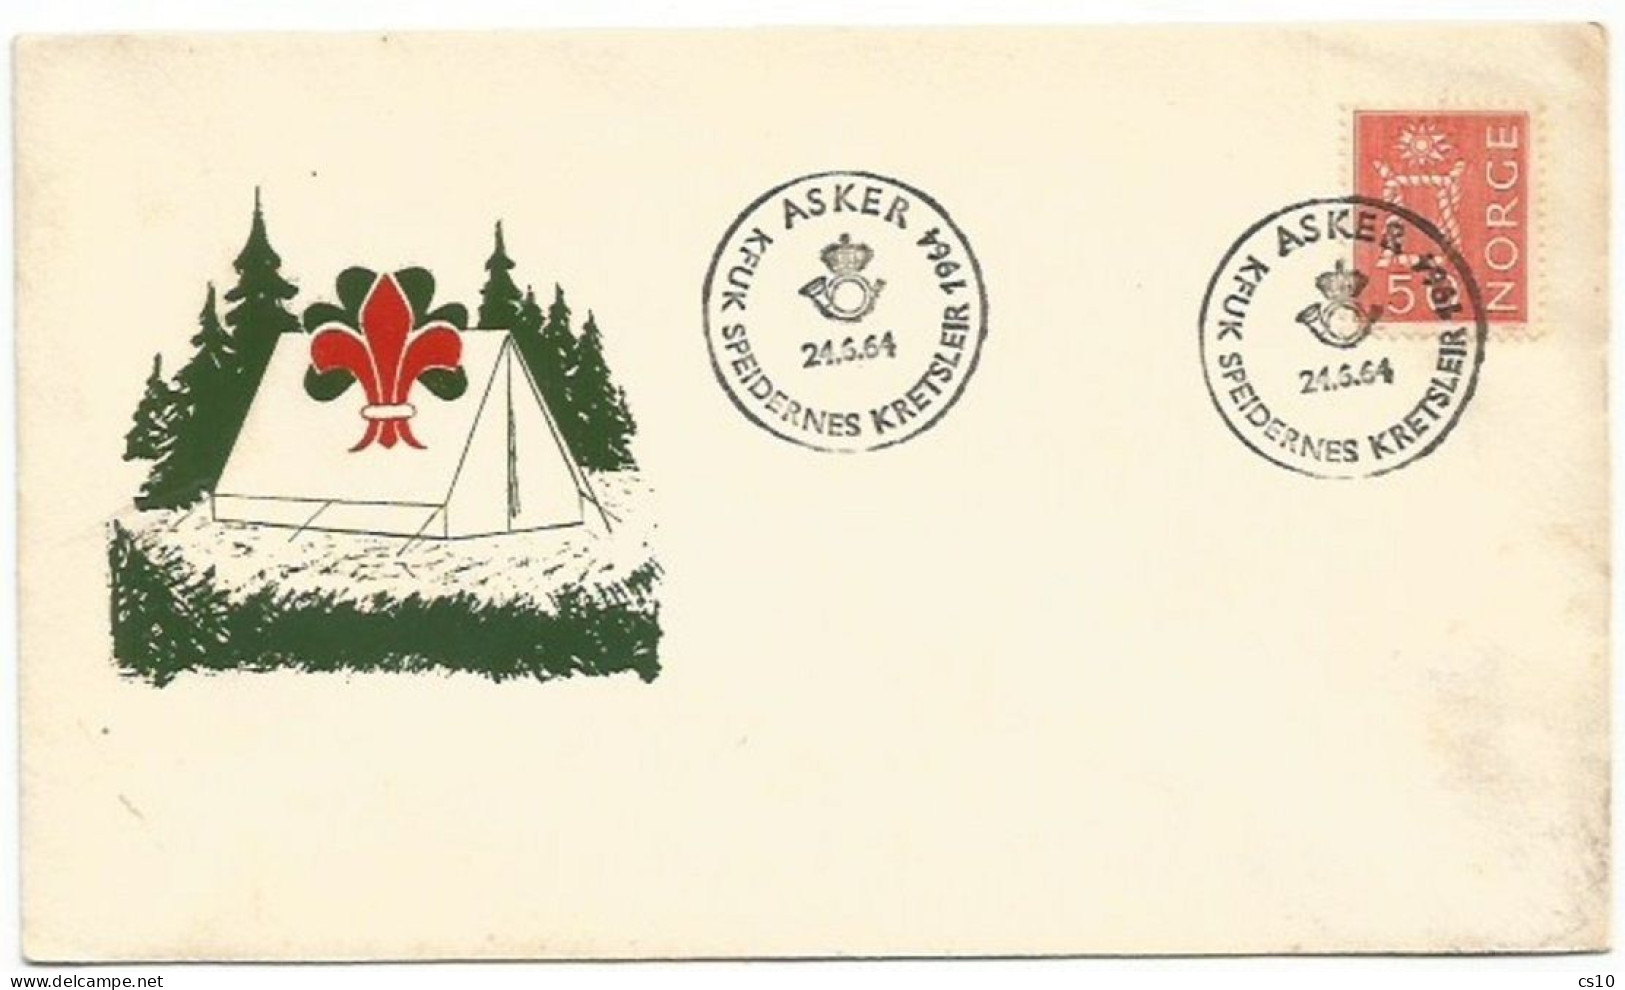 Scout Explorers Camp In Norway - Special Cachet Asker 24jun1964 On Official CV - FDC